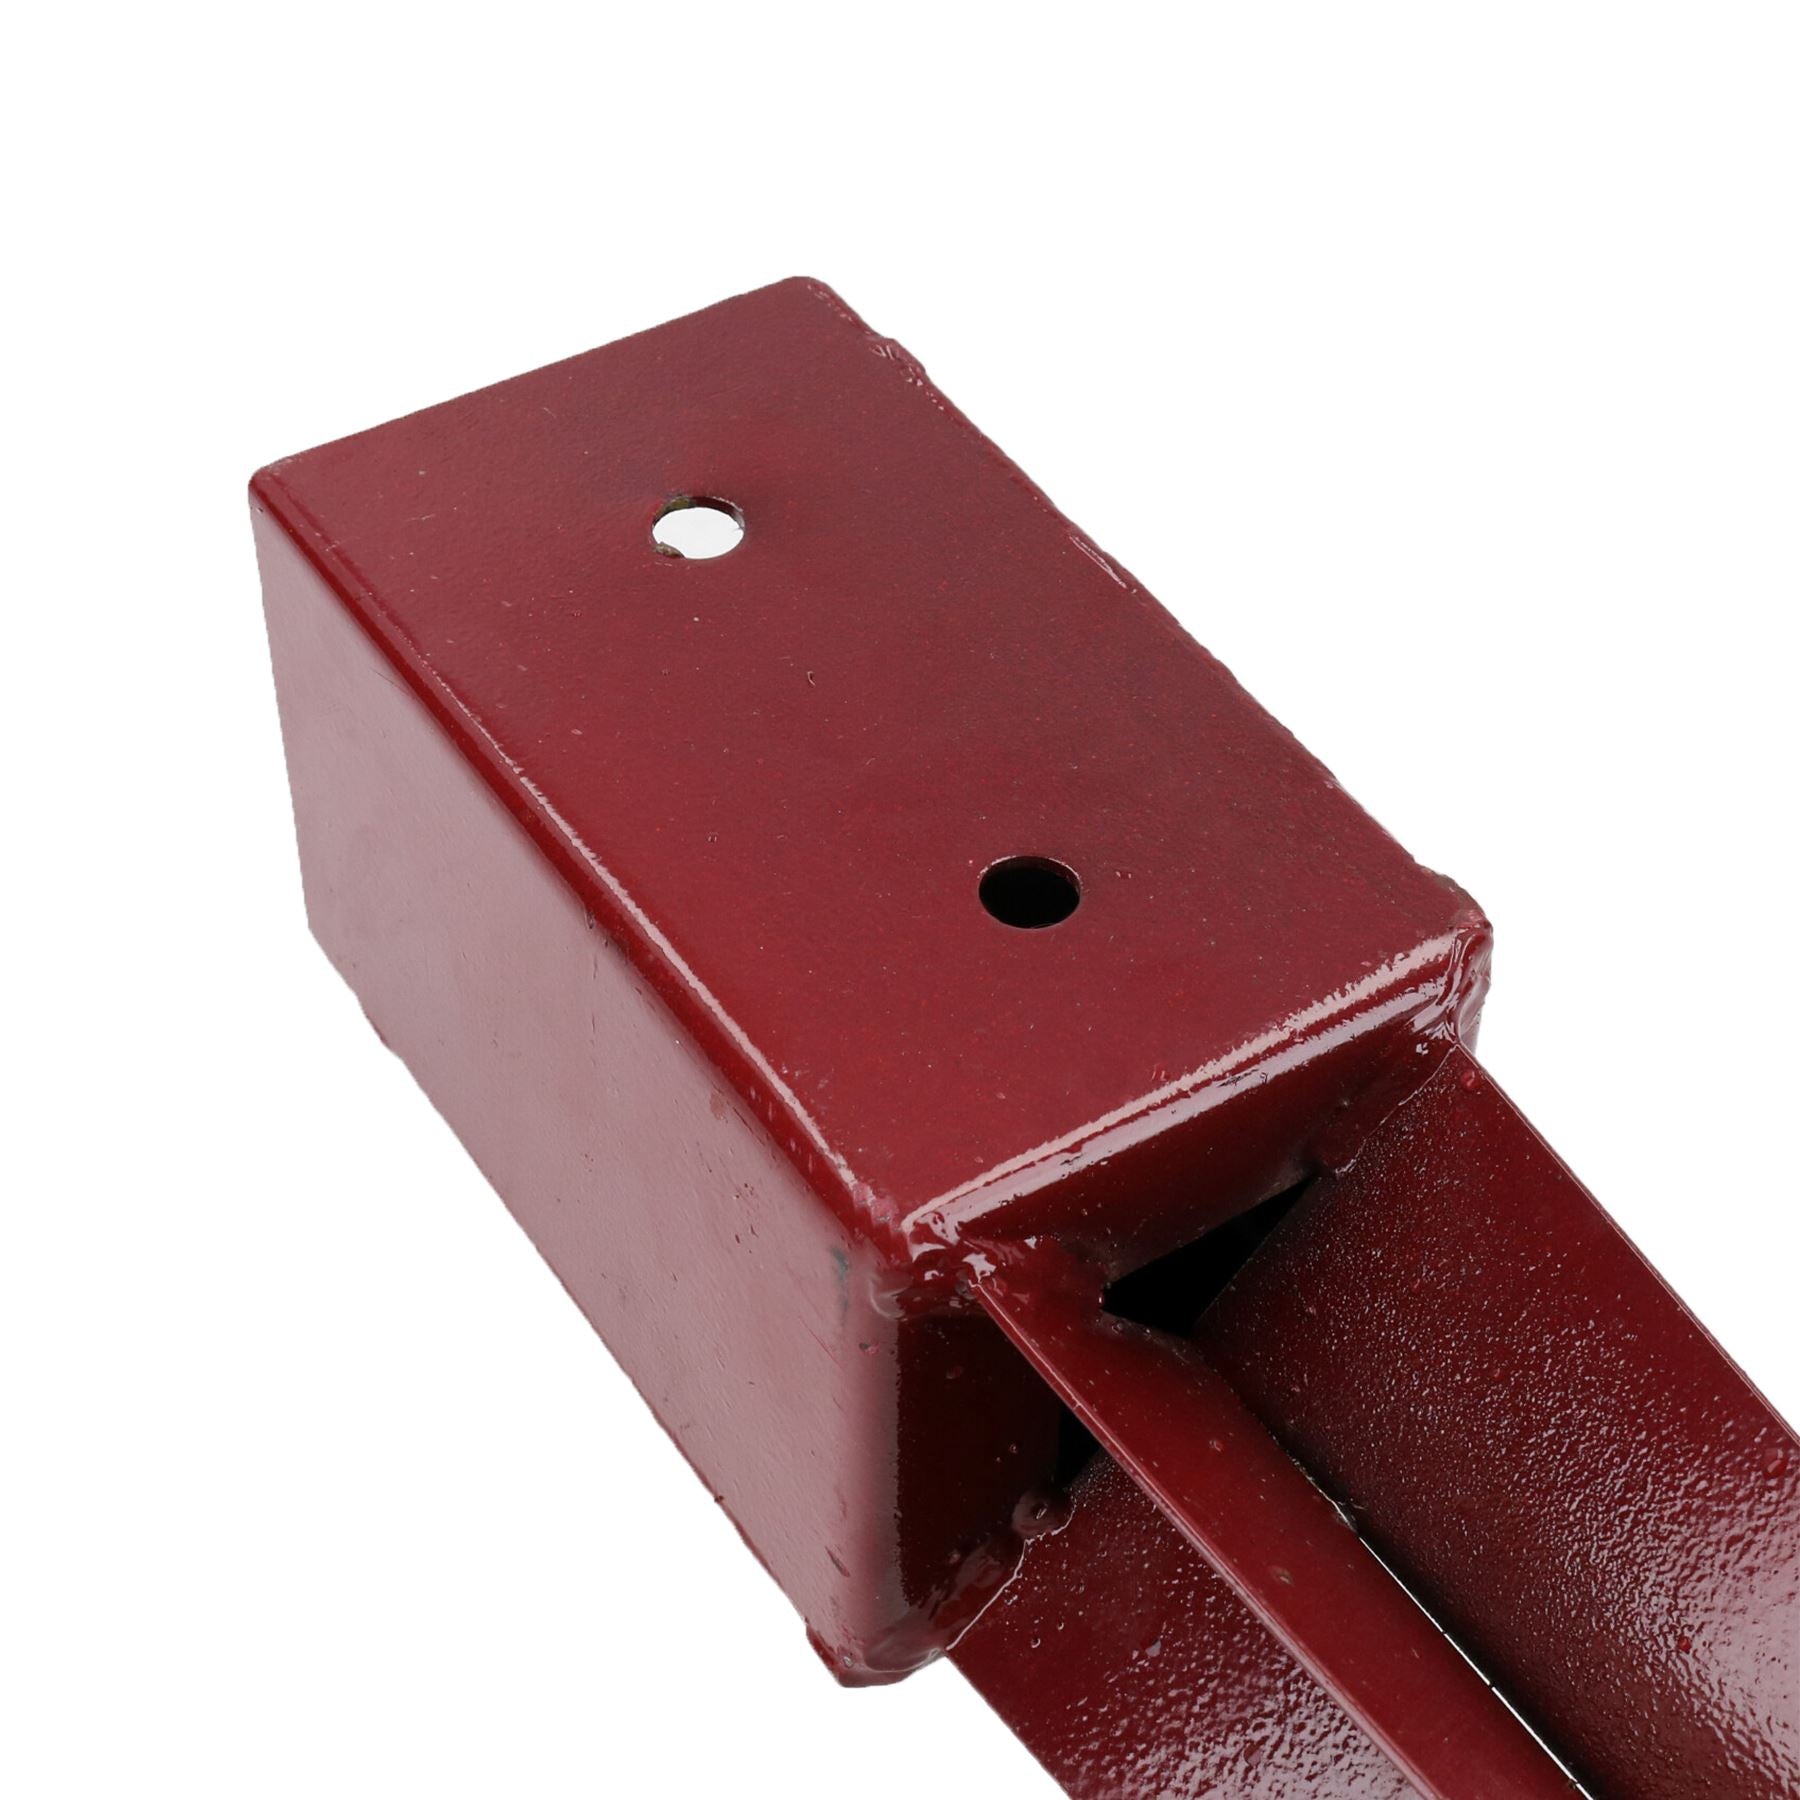 Fence Post Holder Support with Drive down Spike for Posts 75mm x 75mm